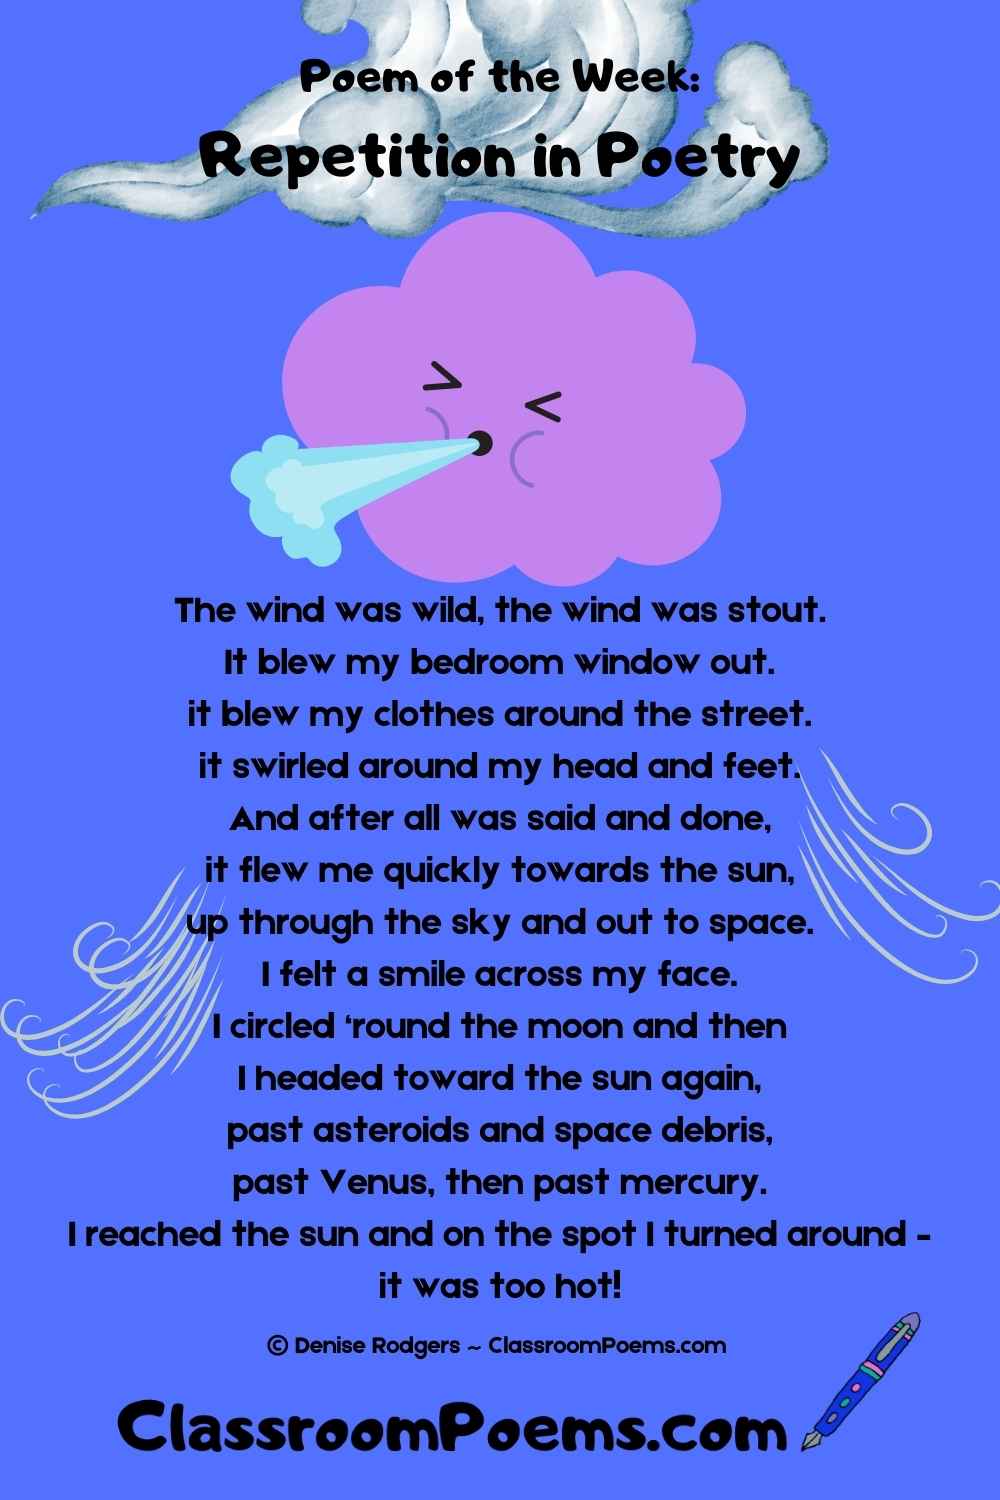 THE WIND WAS WILD, a poem using repetition, by Denise Rodgers on ClassroomPoems.com.